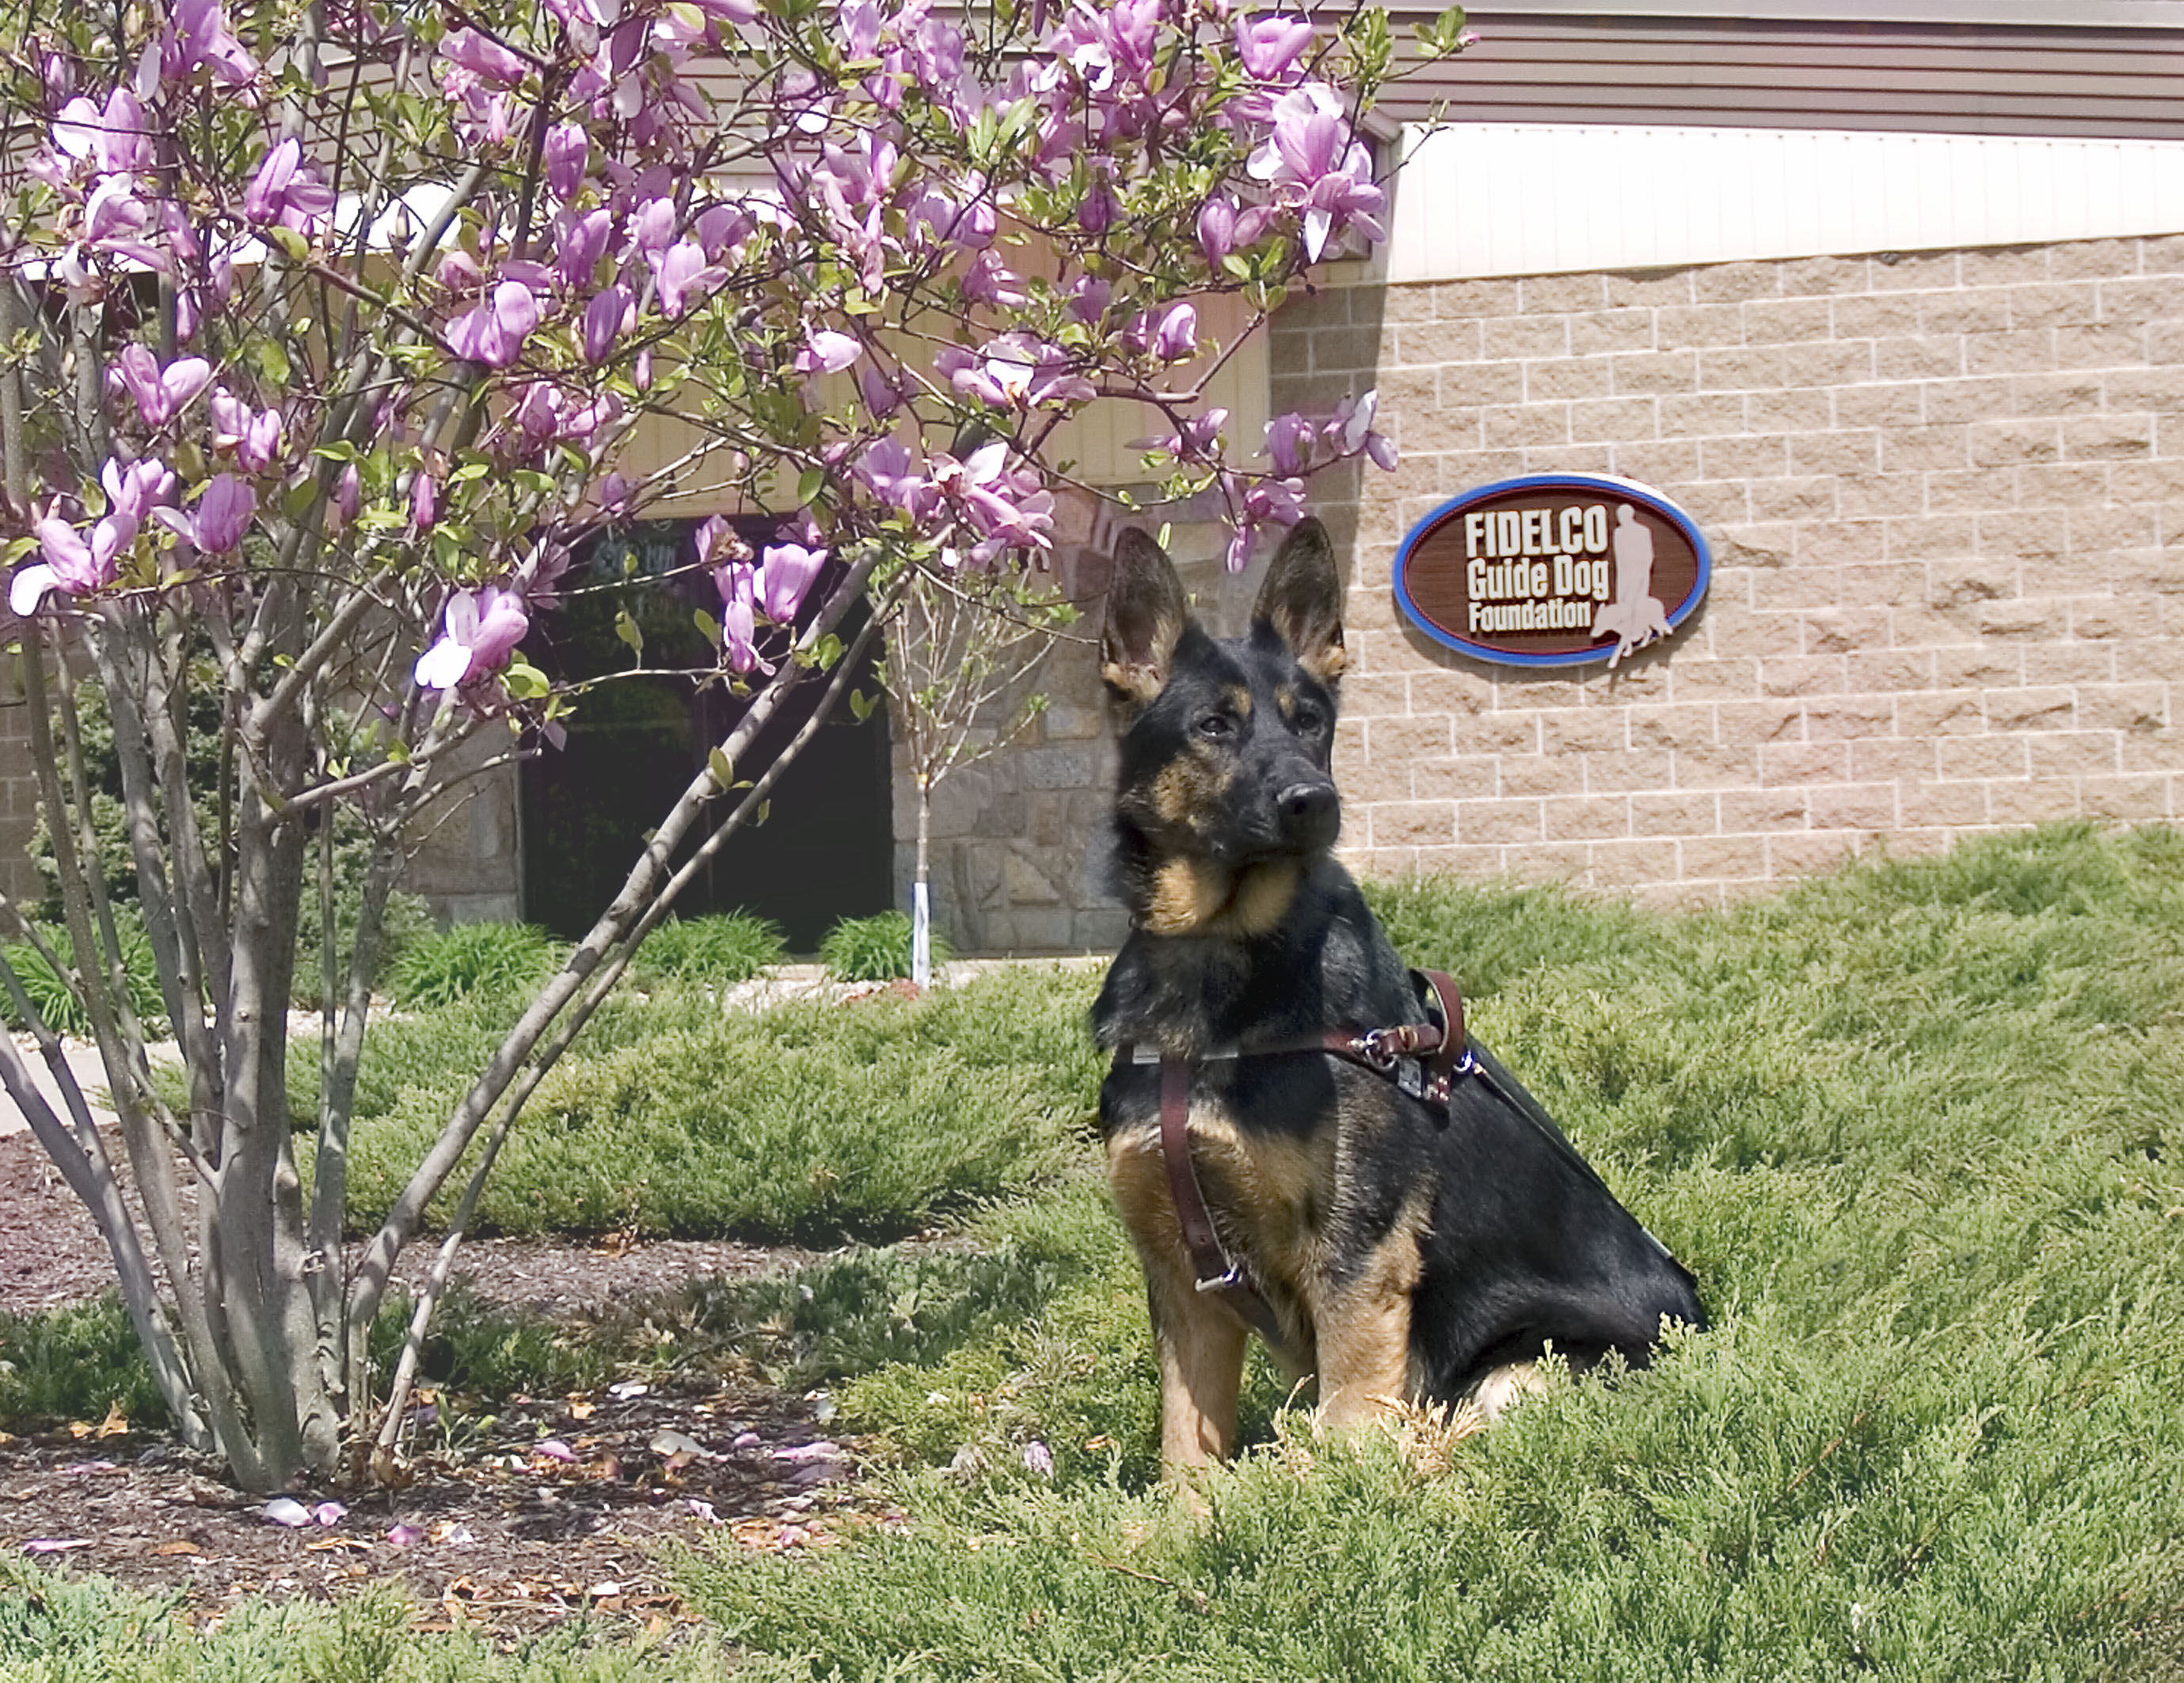 Fidelco Guide Dog Foundation's annual Open House is set for Saturday, May 3rd 2014.